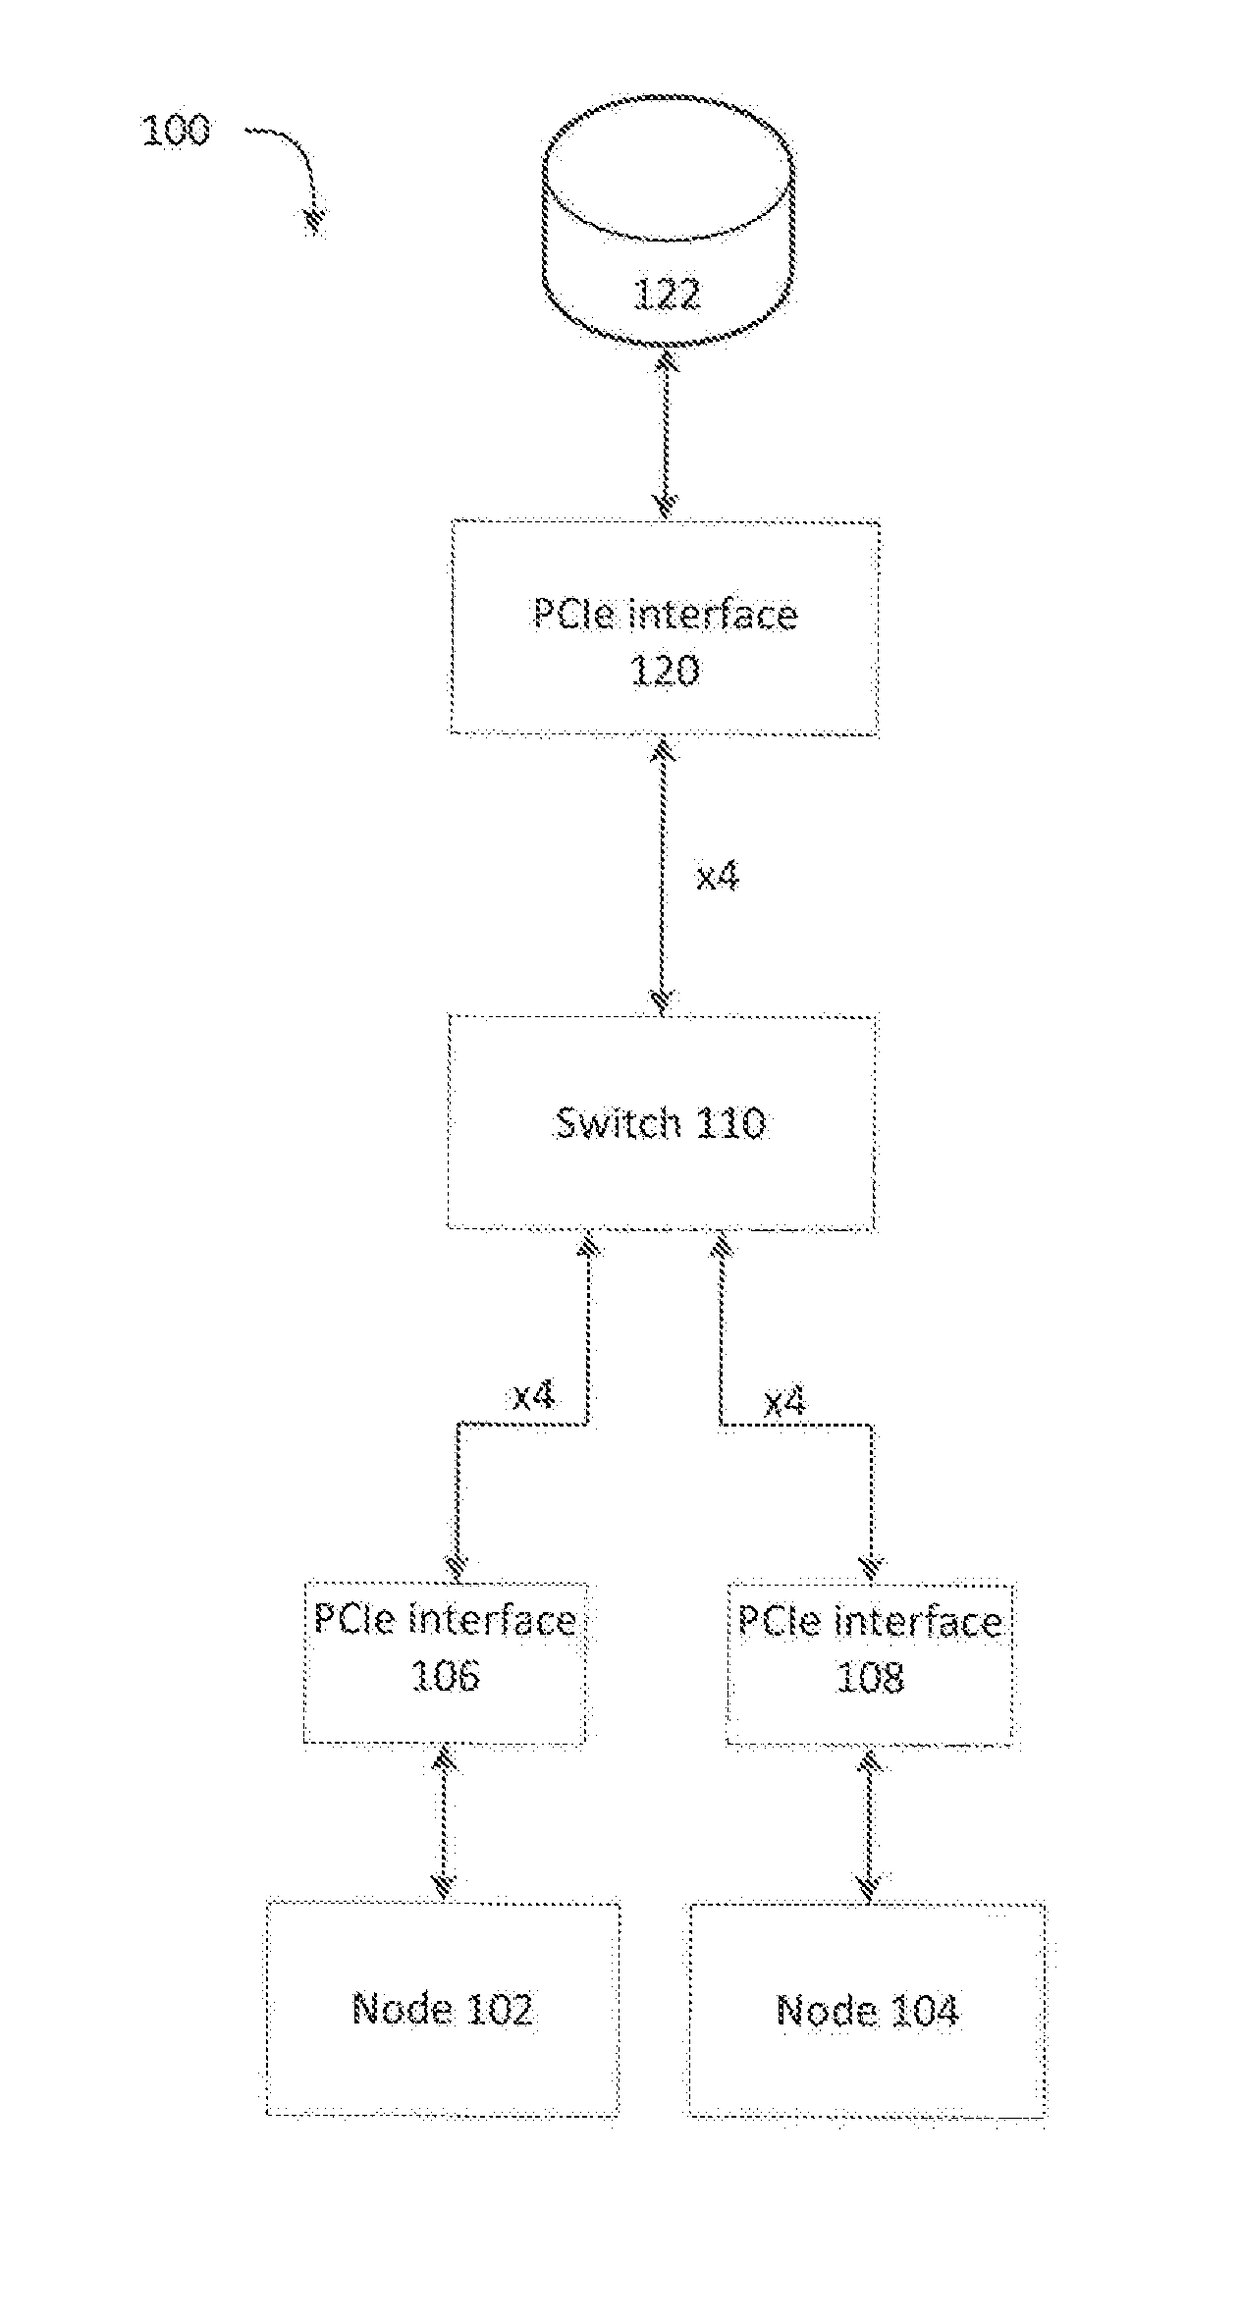 System for switching between a single node pcie mode and a multi-node pcie mode